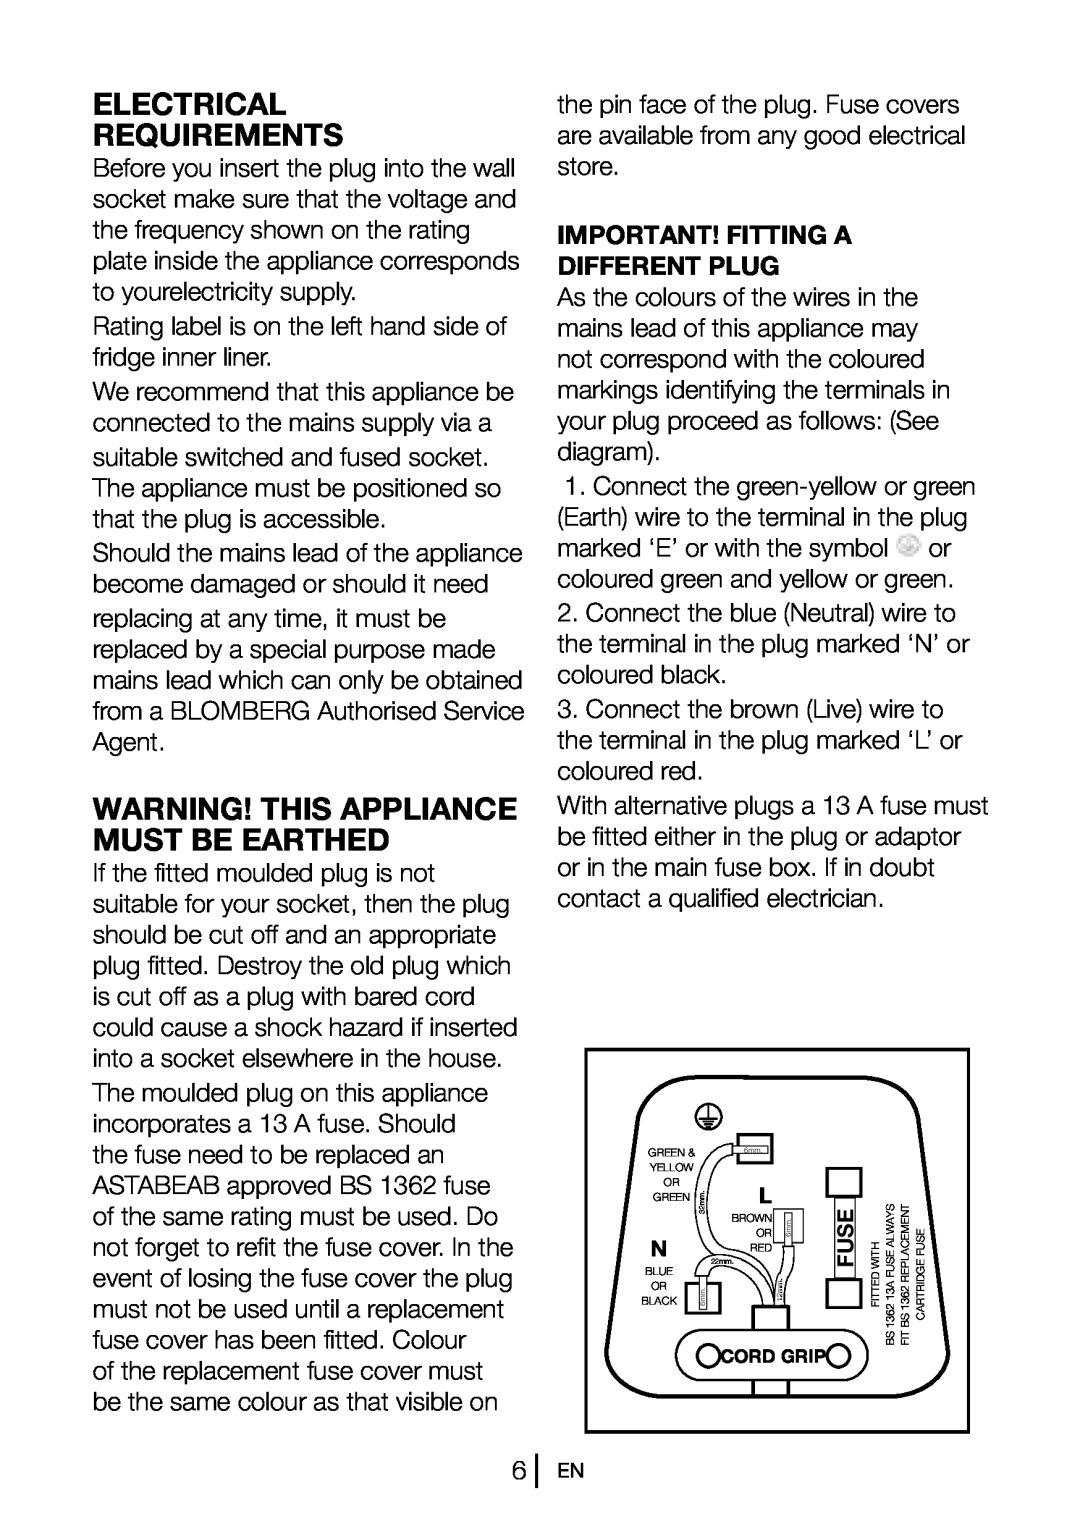 Blomberg KGM 9680 P Electrical Requirements, Warning! This Appliance Must Be Earthed, Important! Fitting A Different Plug 